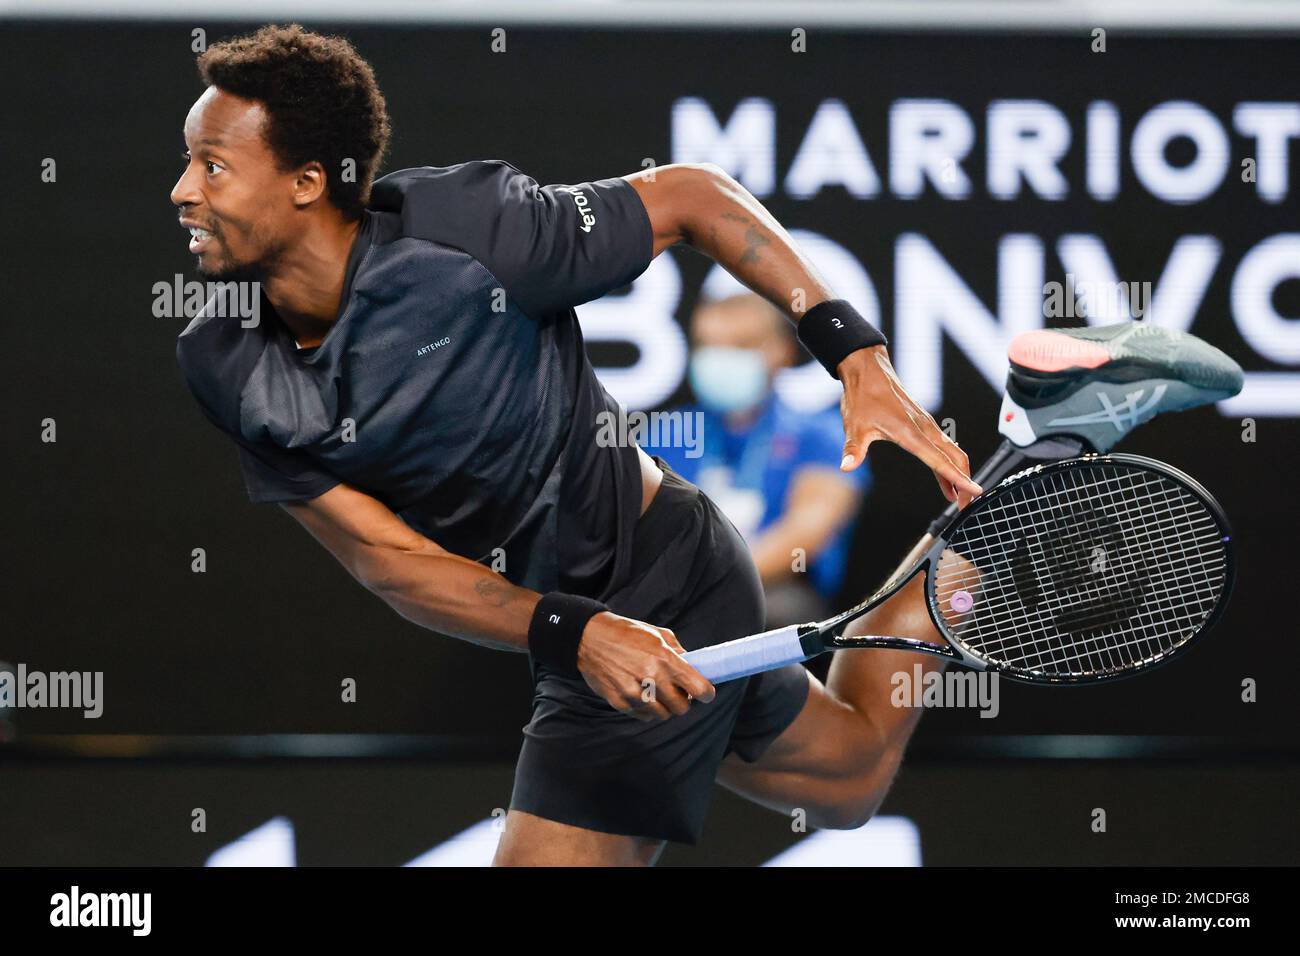 Gael Monfils of France serves to Alexander Bublik of Ukraine during their second round match at the Australian Open tennis championships in Melbourne, Australia, Wednesday, Jan